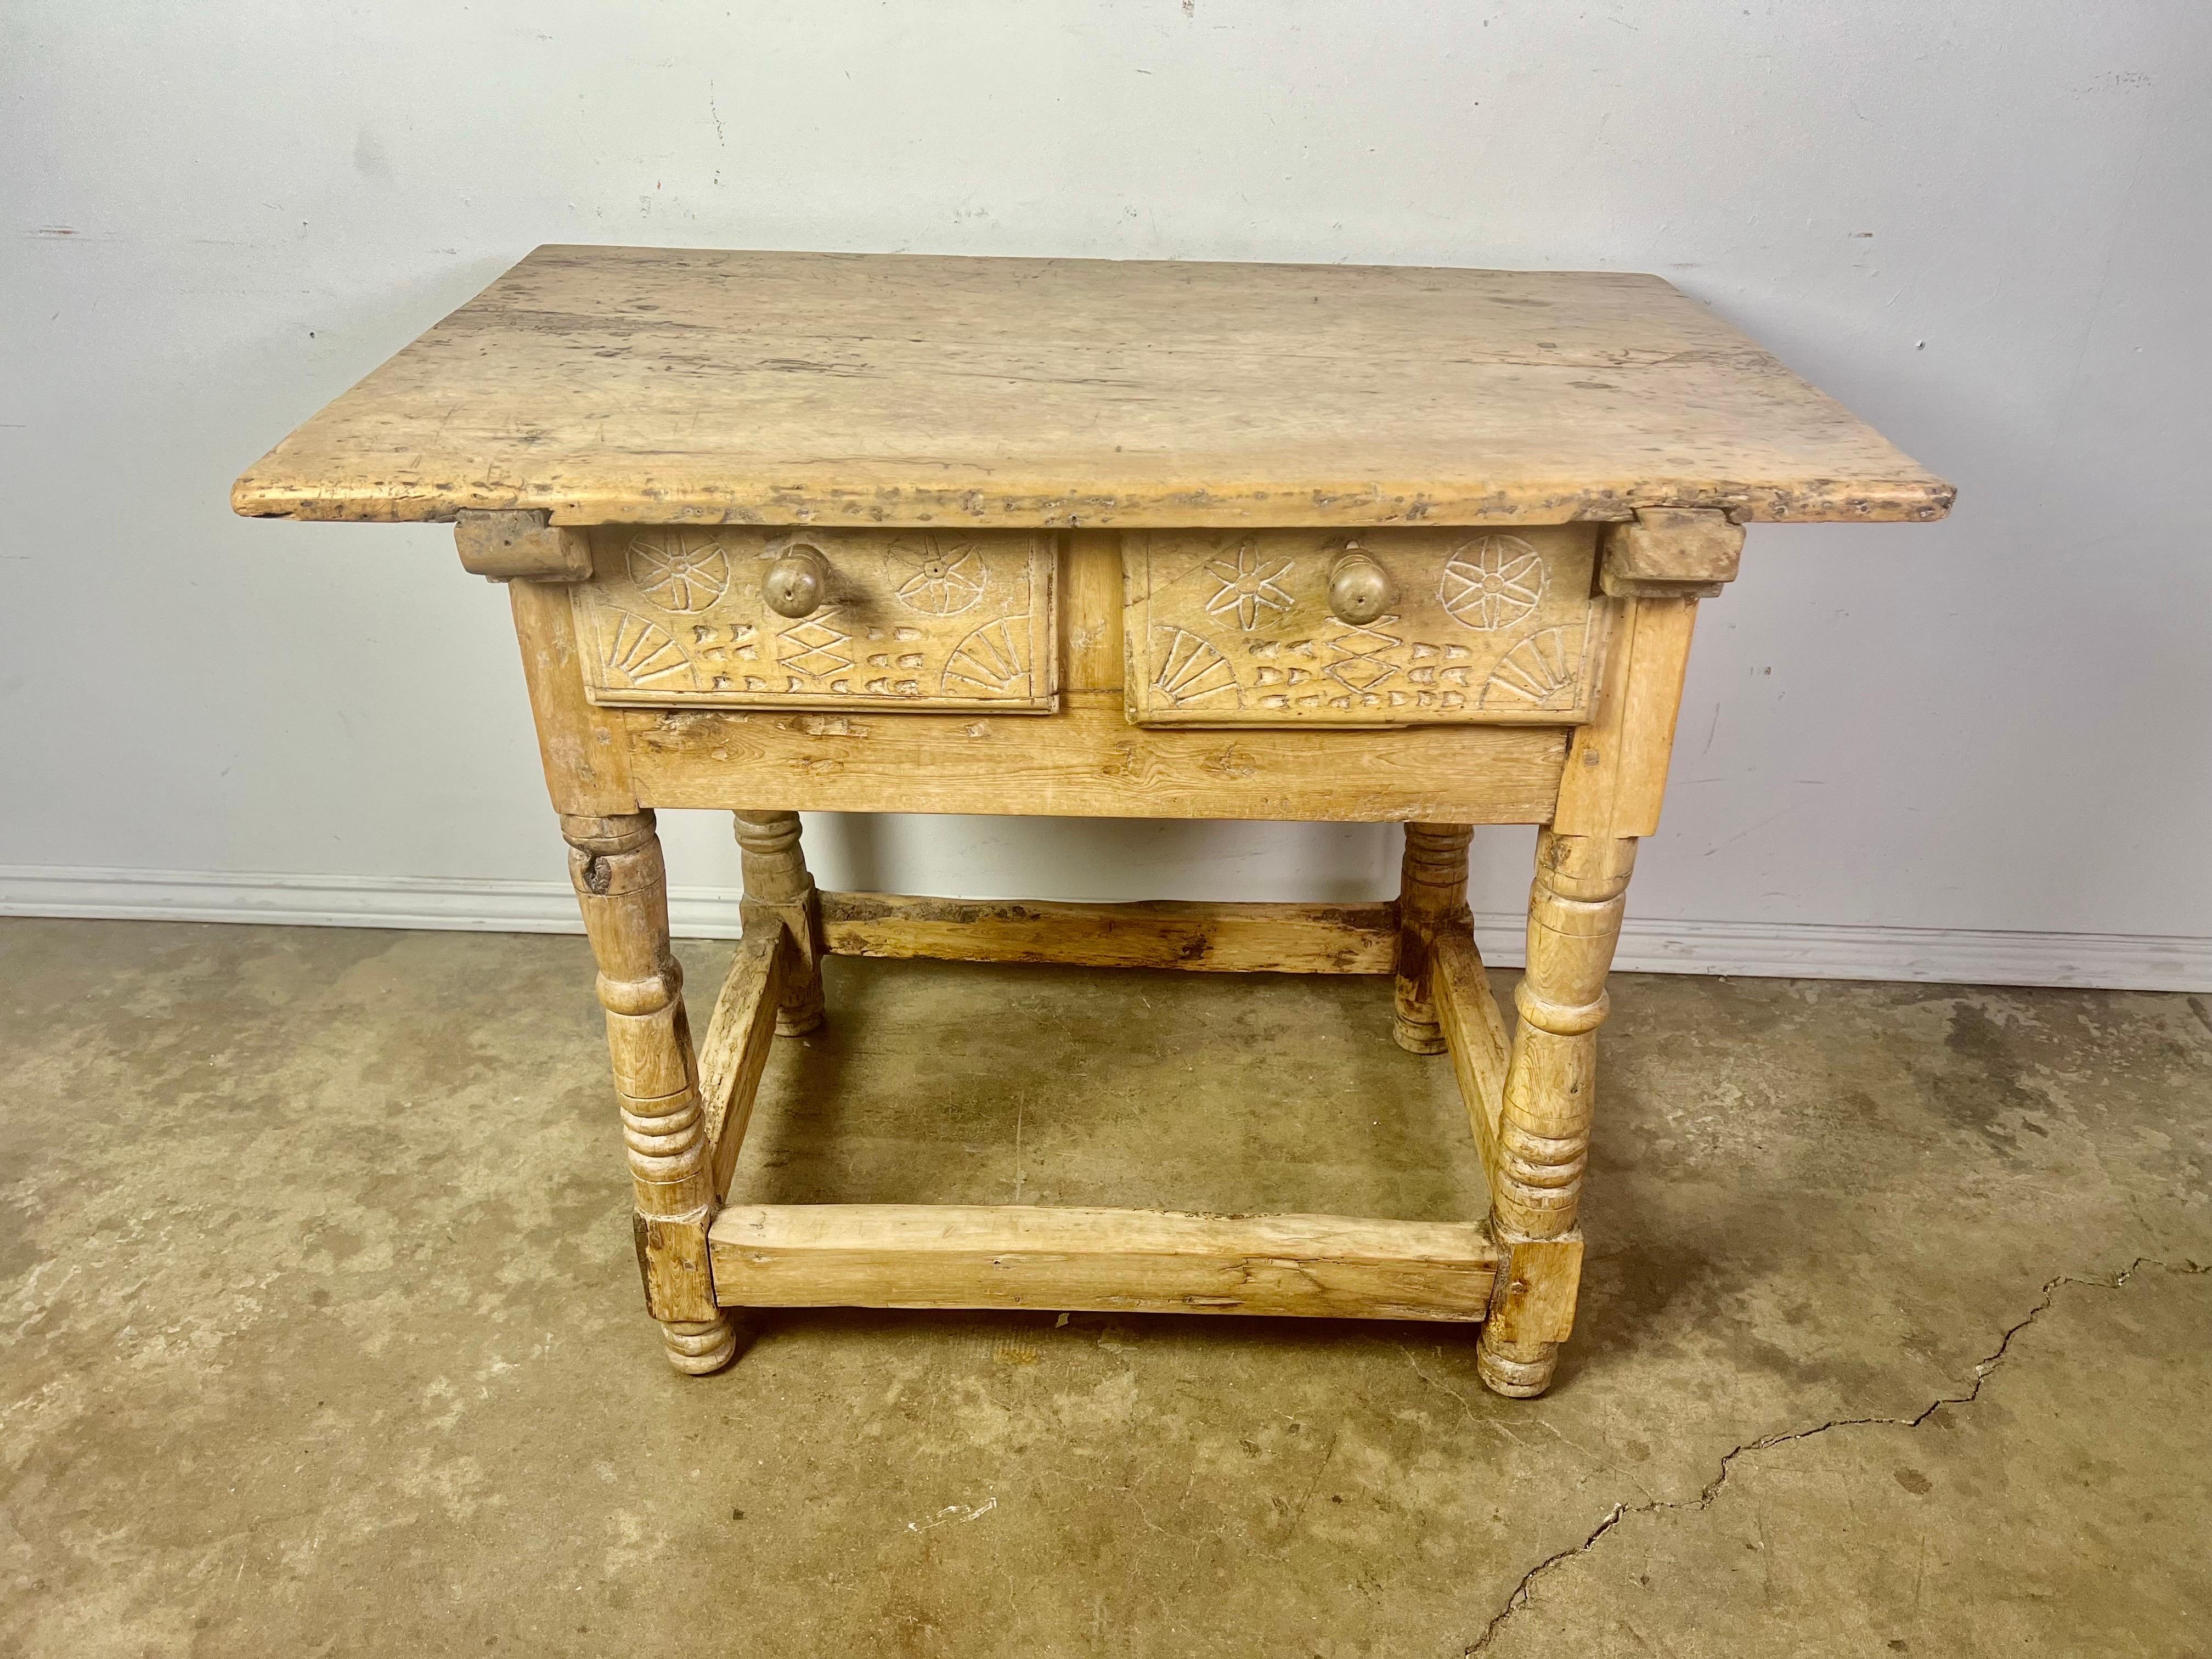 18th century bleached walnut Spanish Colonial table with two drawers. The four legs are connected by a stretcher. The two drawers have primitive style carvings.
It is beautifully worn and has a nice patina.